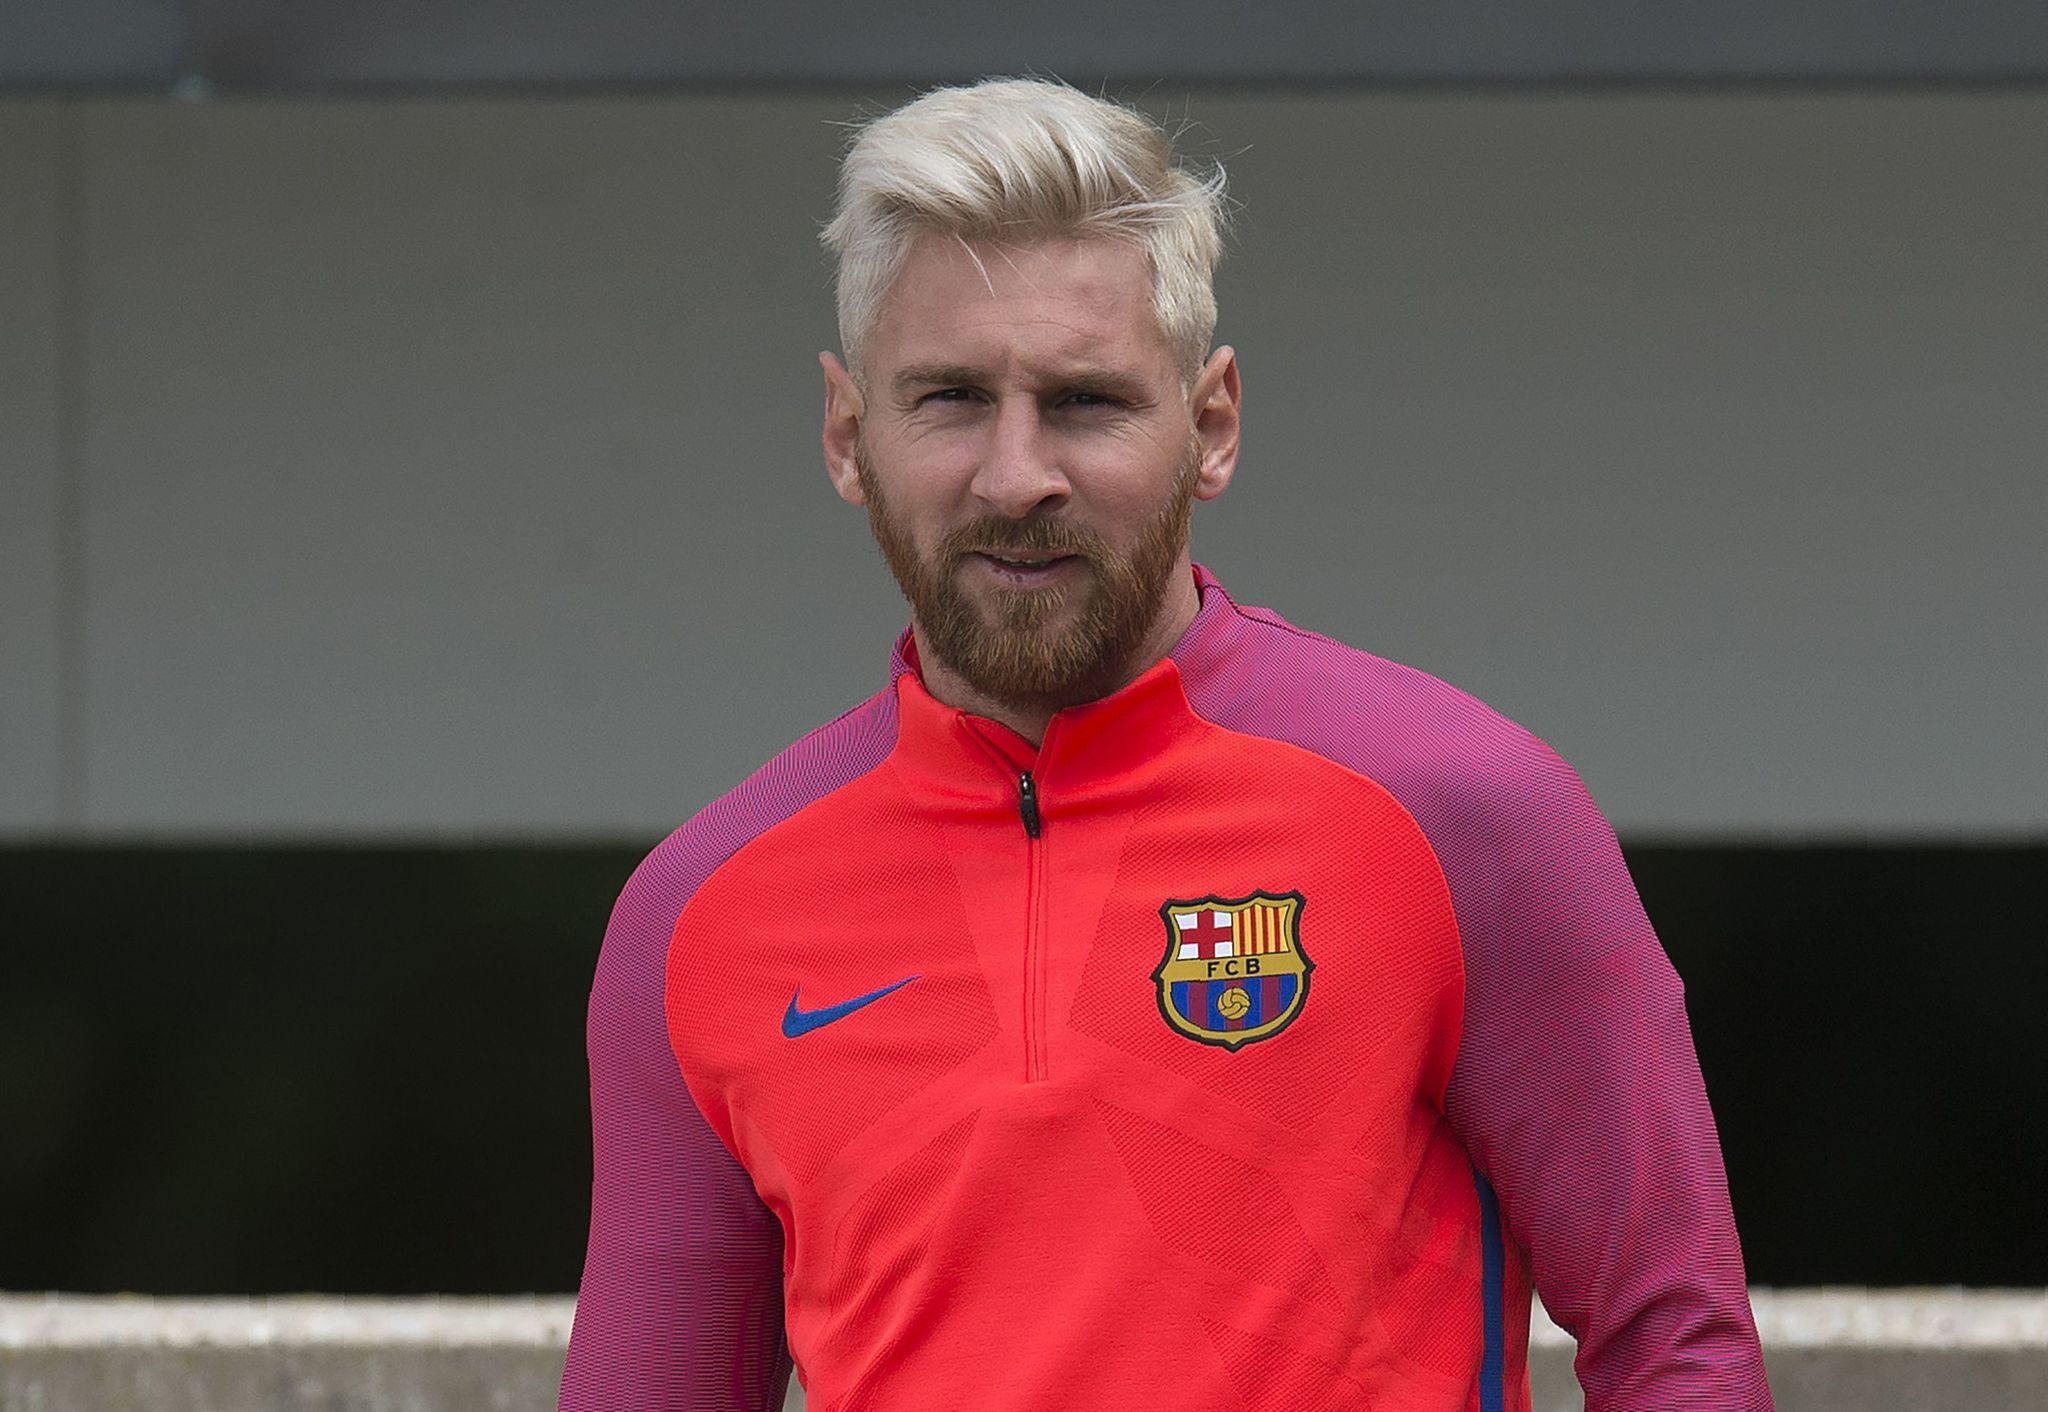 With new blond look, Lionel Messi's head not feet creating a stir - Chicago Tribune2048 x 1412